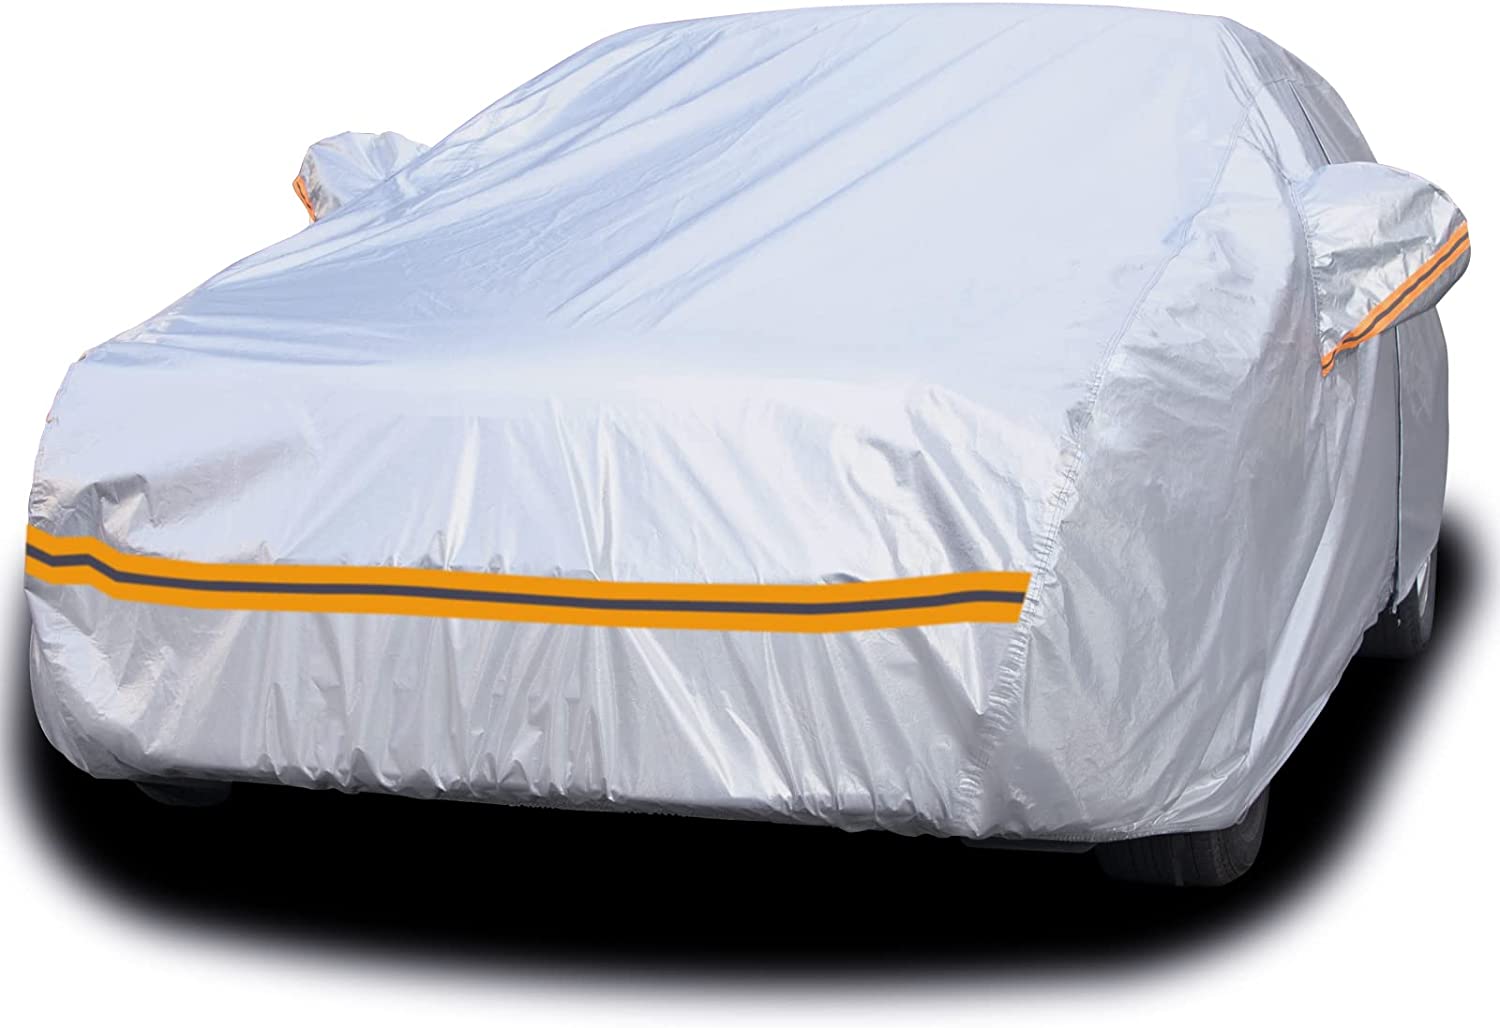 Kayme 6 Layers Hatchback Car Cover Waterproof All Weather for Automobiles,  Outdoor Full Cover Rain Sun UV Protection with Zipper Cotton, Universal Fit